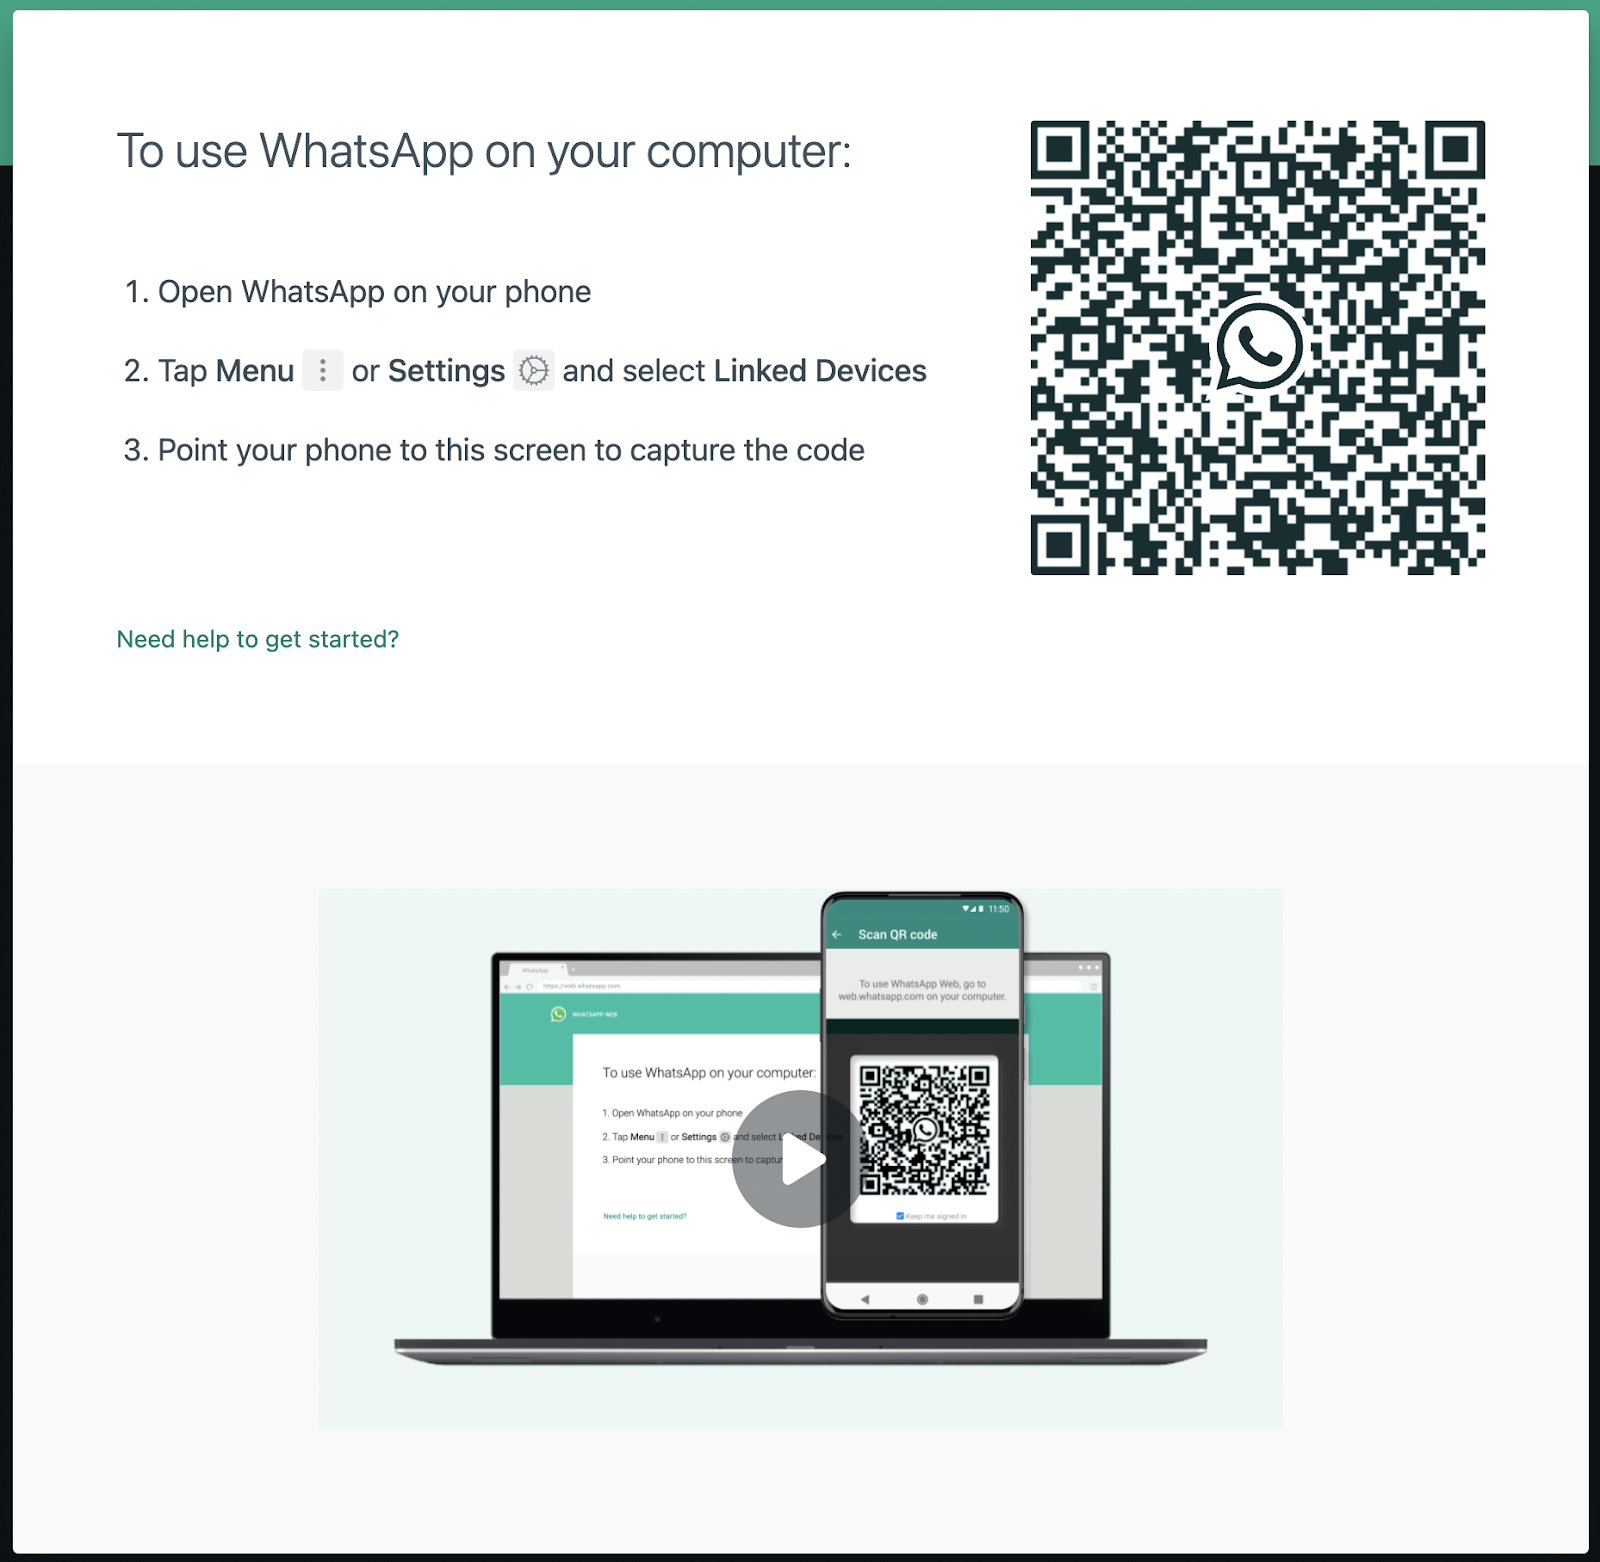 Link your computer to your WhatsApp account on your phone by opening WhatsApp on your phone.